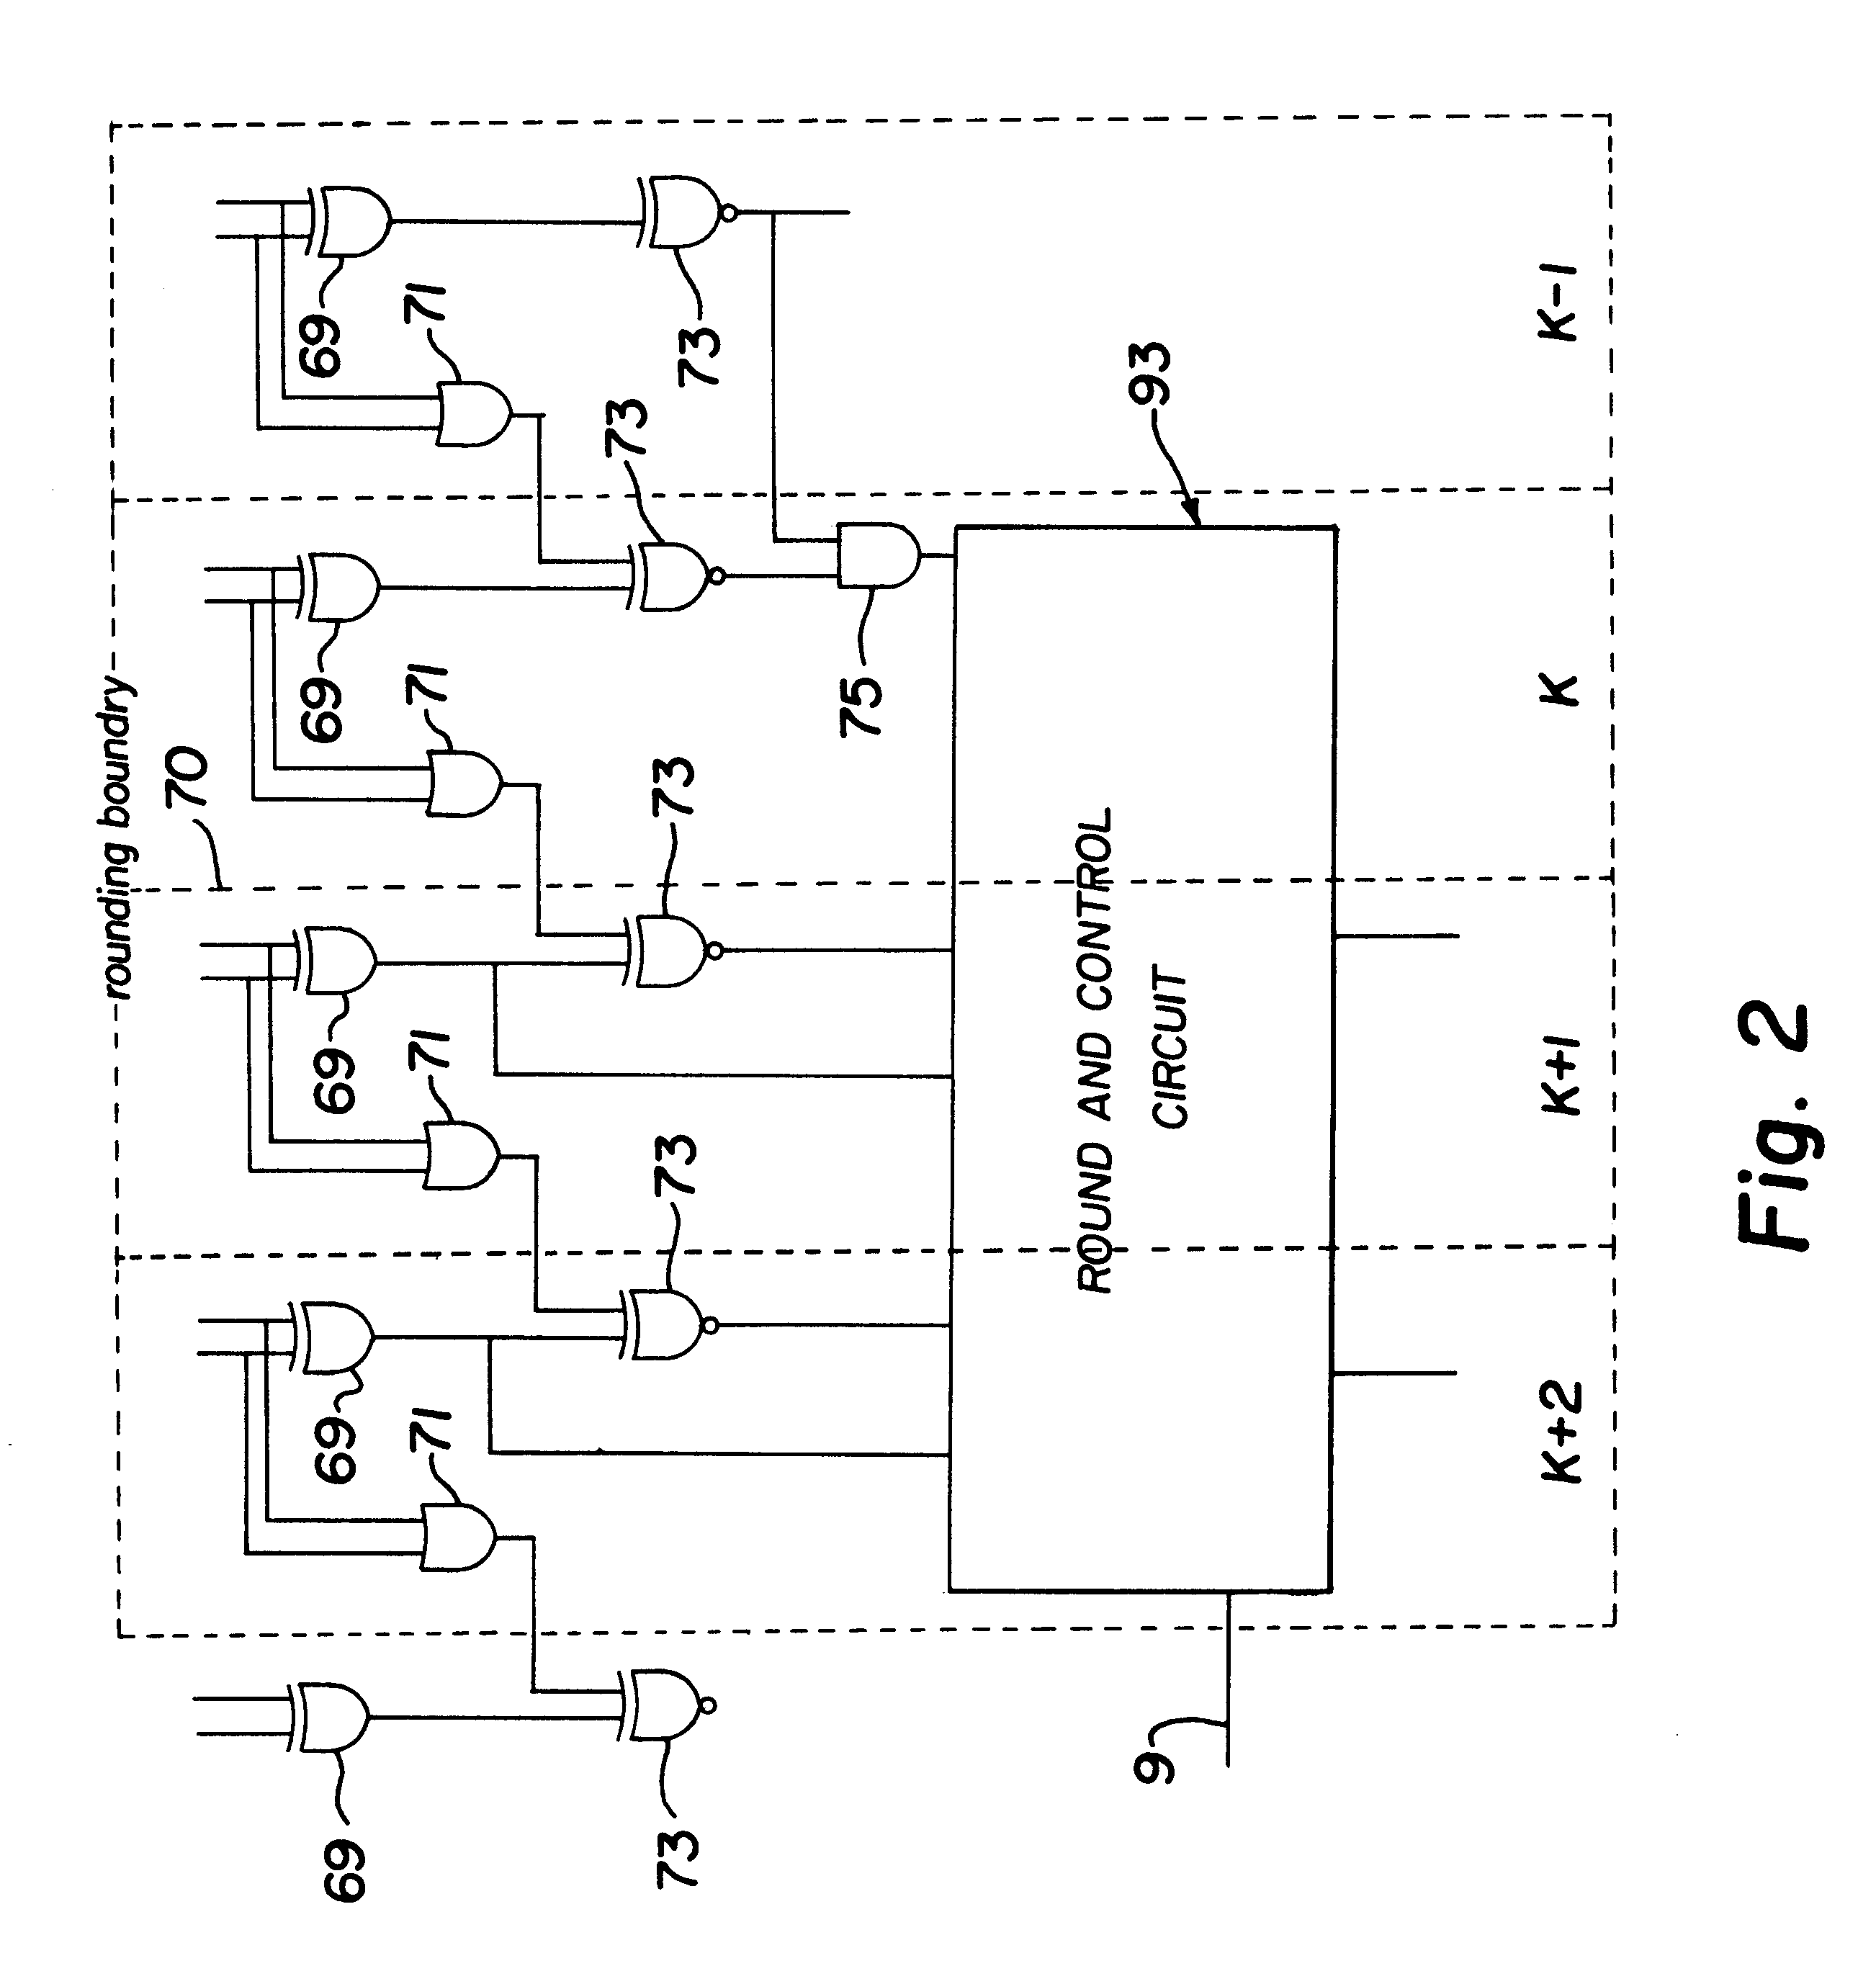 Adder circuit with the ability to detect zero when rounding